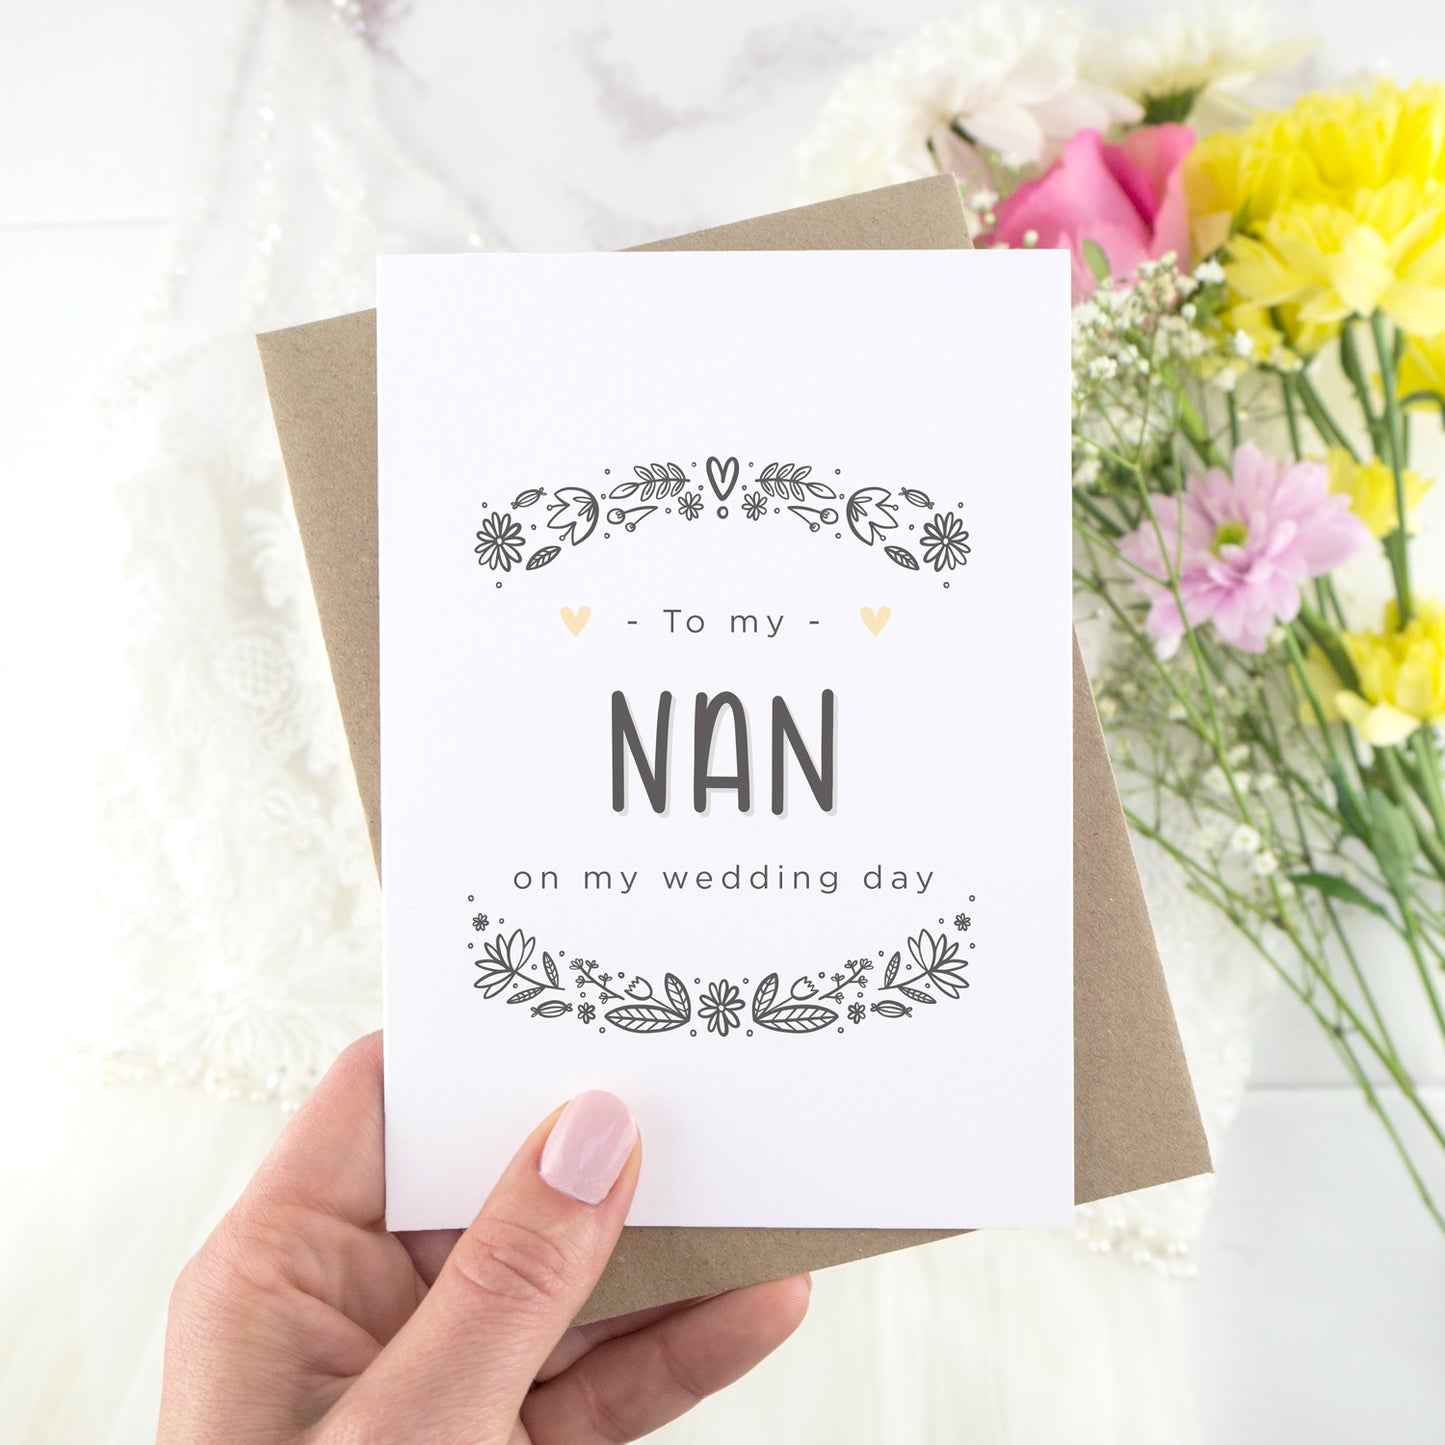 To my nan on my wedding day. A white card with grey hand drawn lettering, and a grey floral border. The image features a wedding dress and bouquet of flowers.